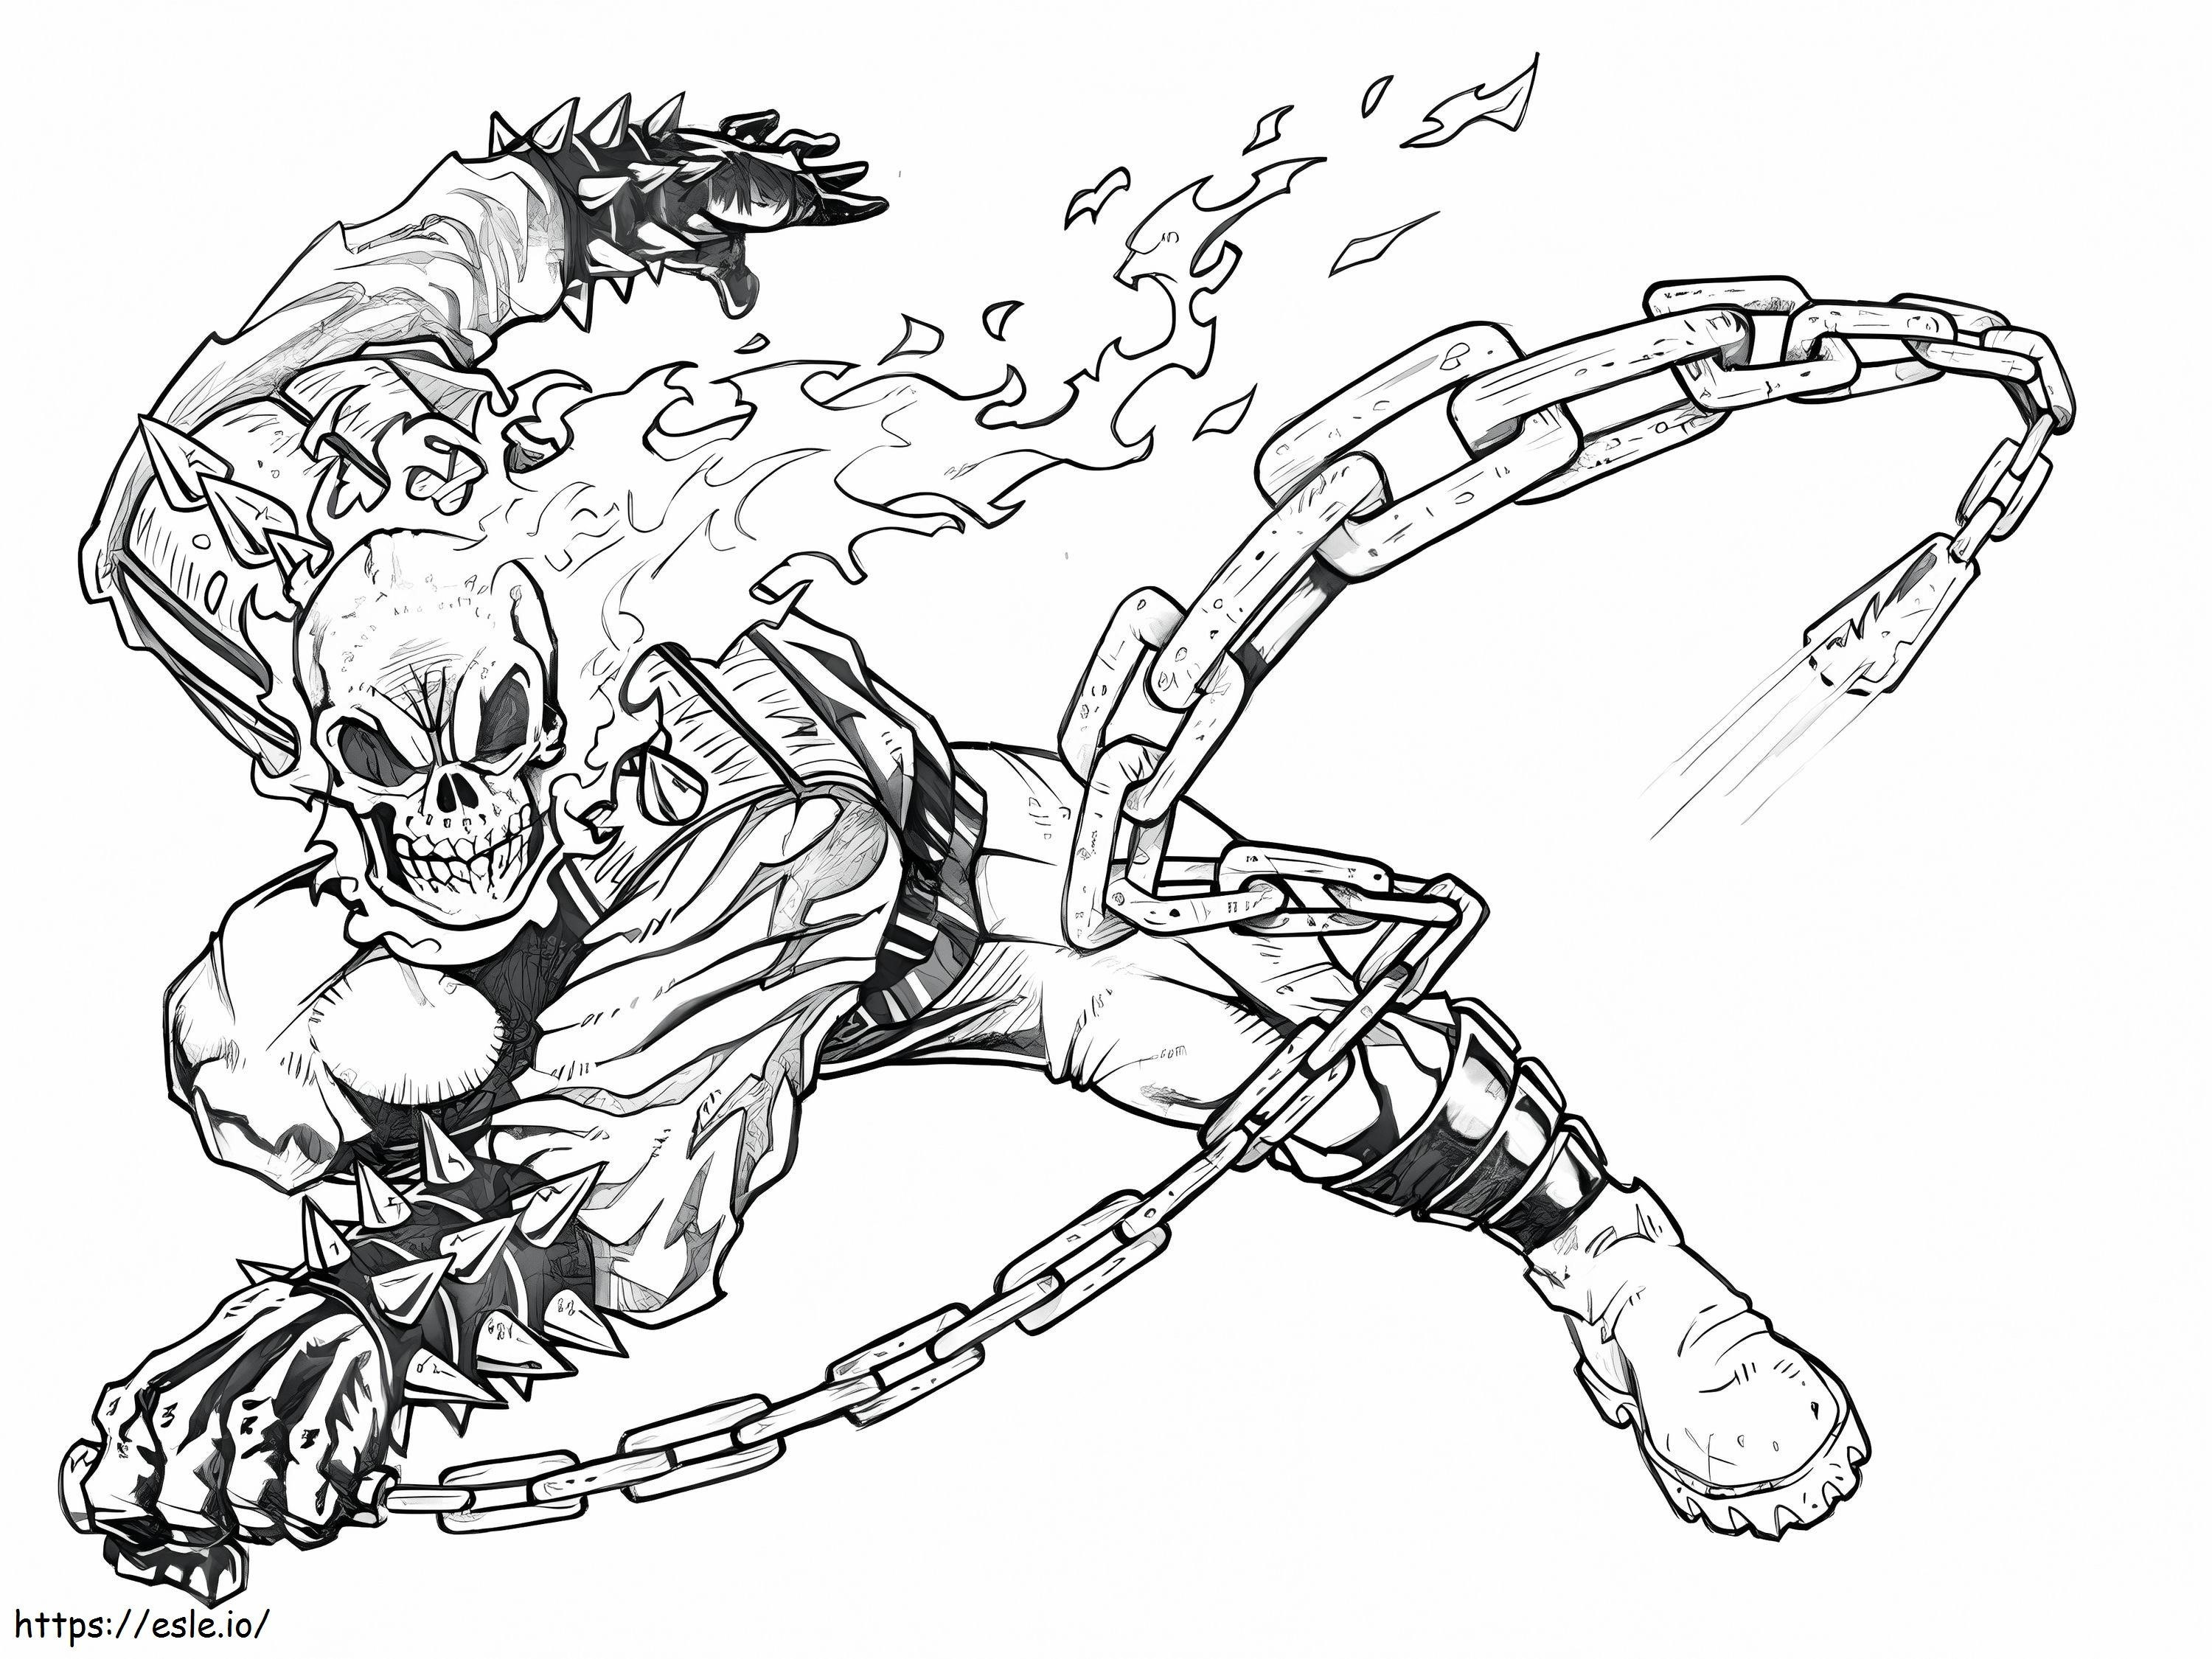 Good Ghost Rider coloring page